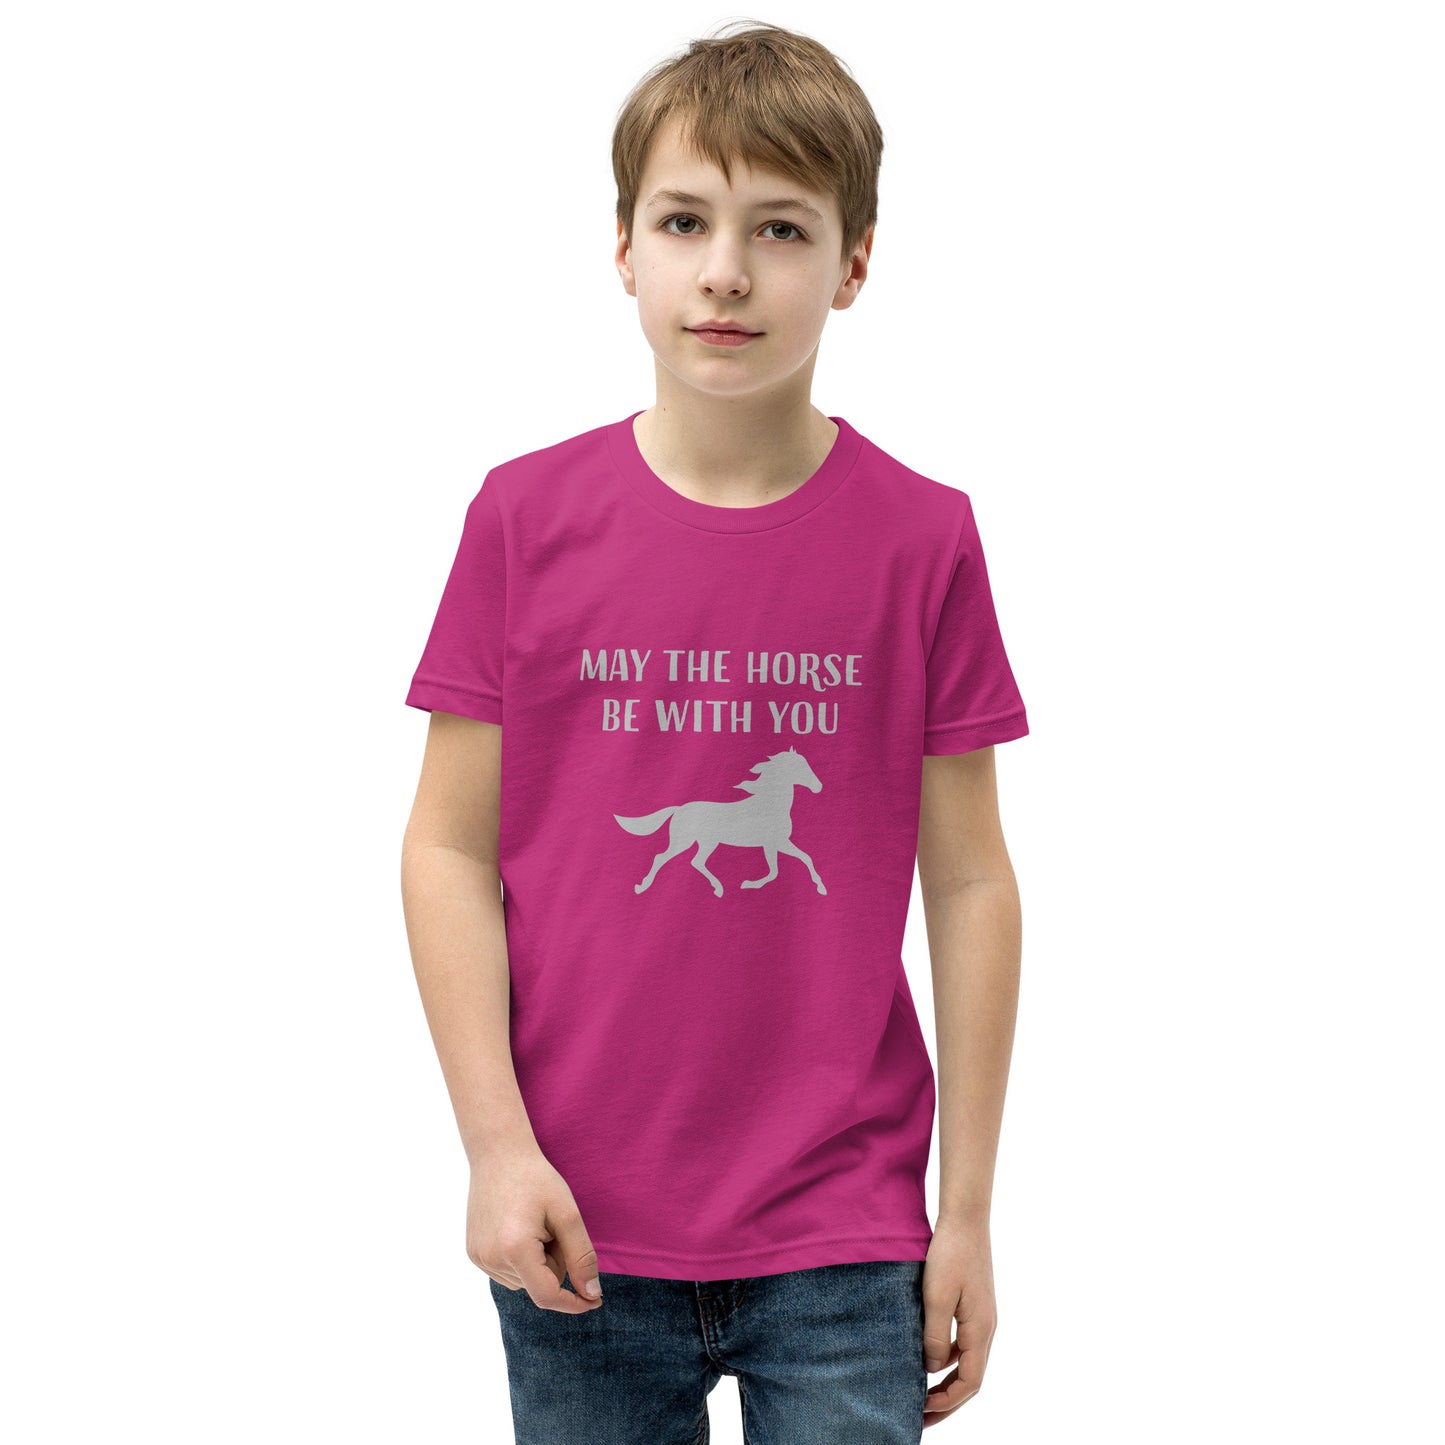 May the Horse be with You - Youth Short Sleeve T-Shirt